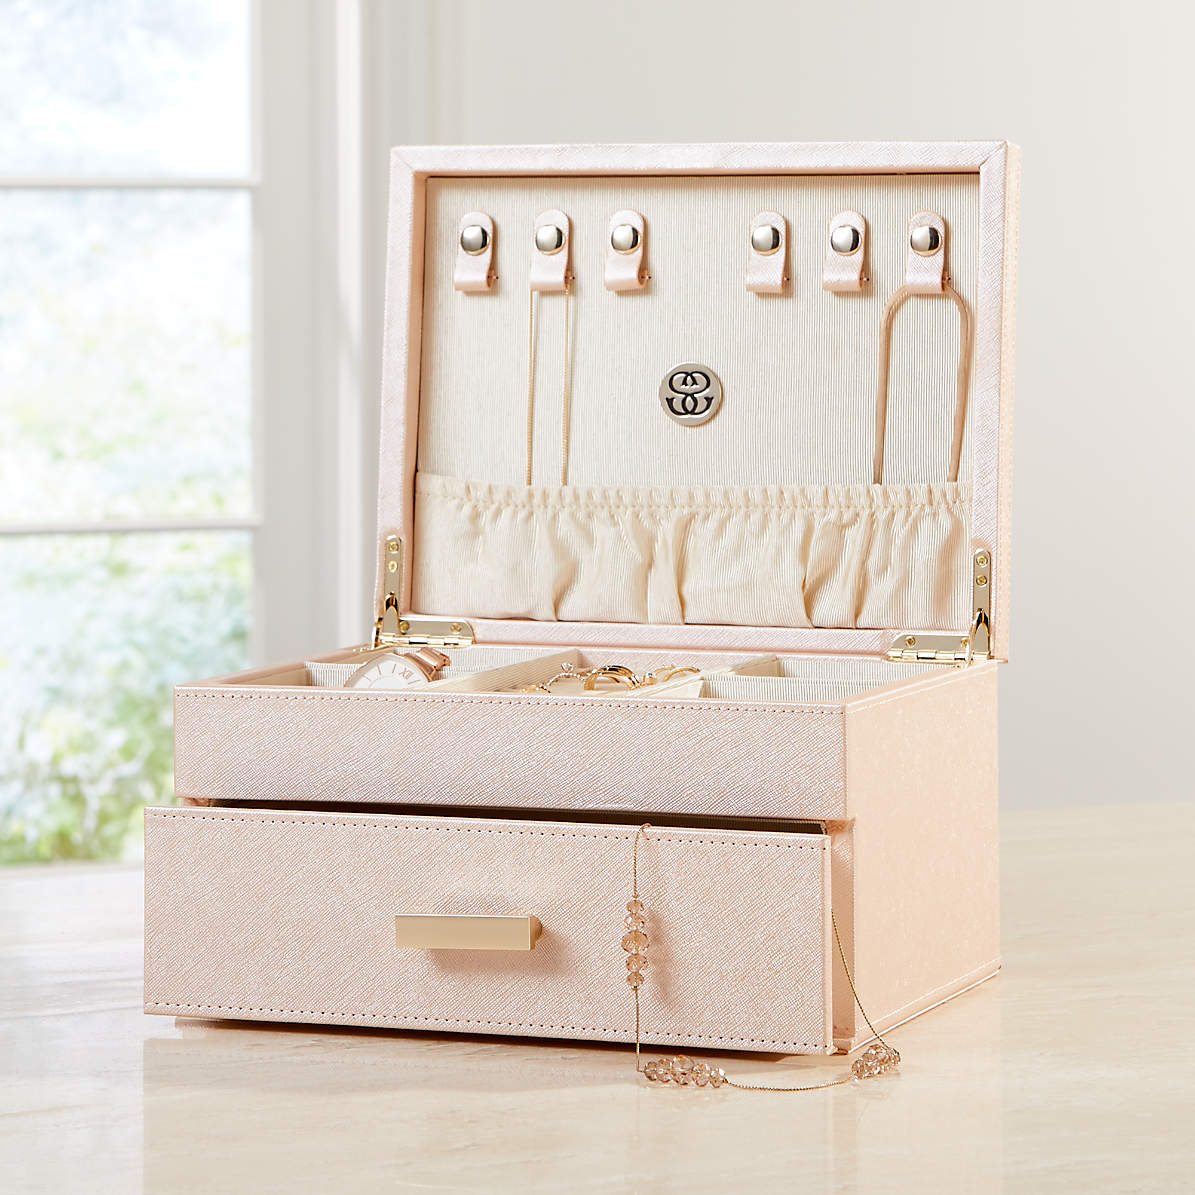 where to find jewelry boxes